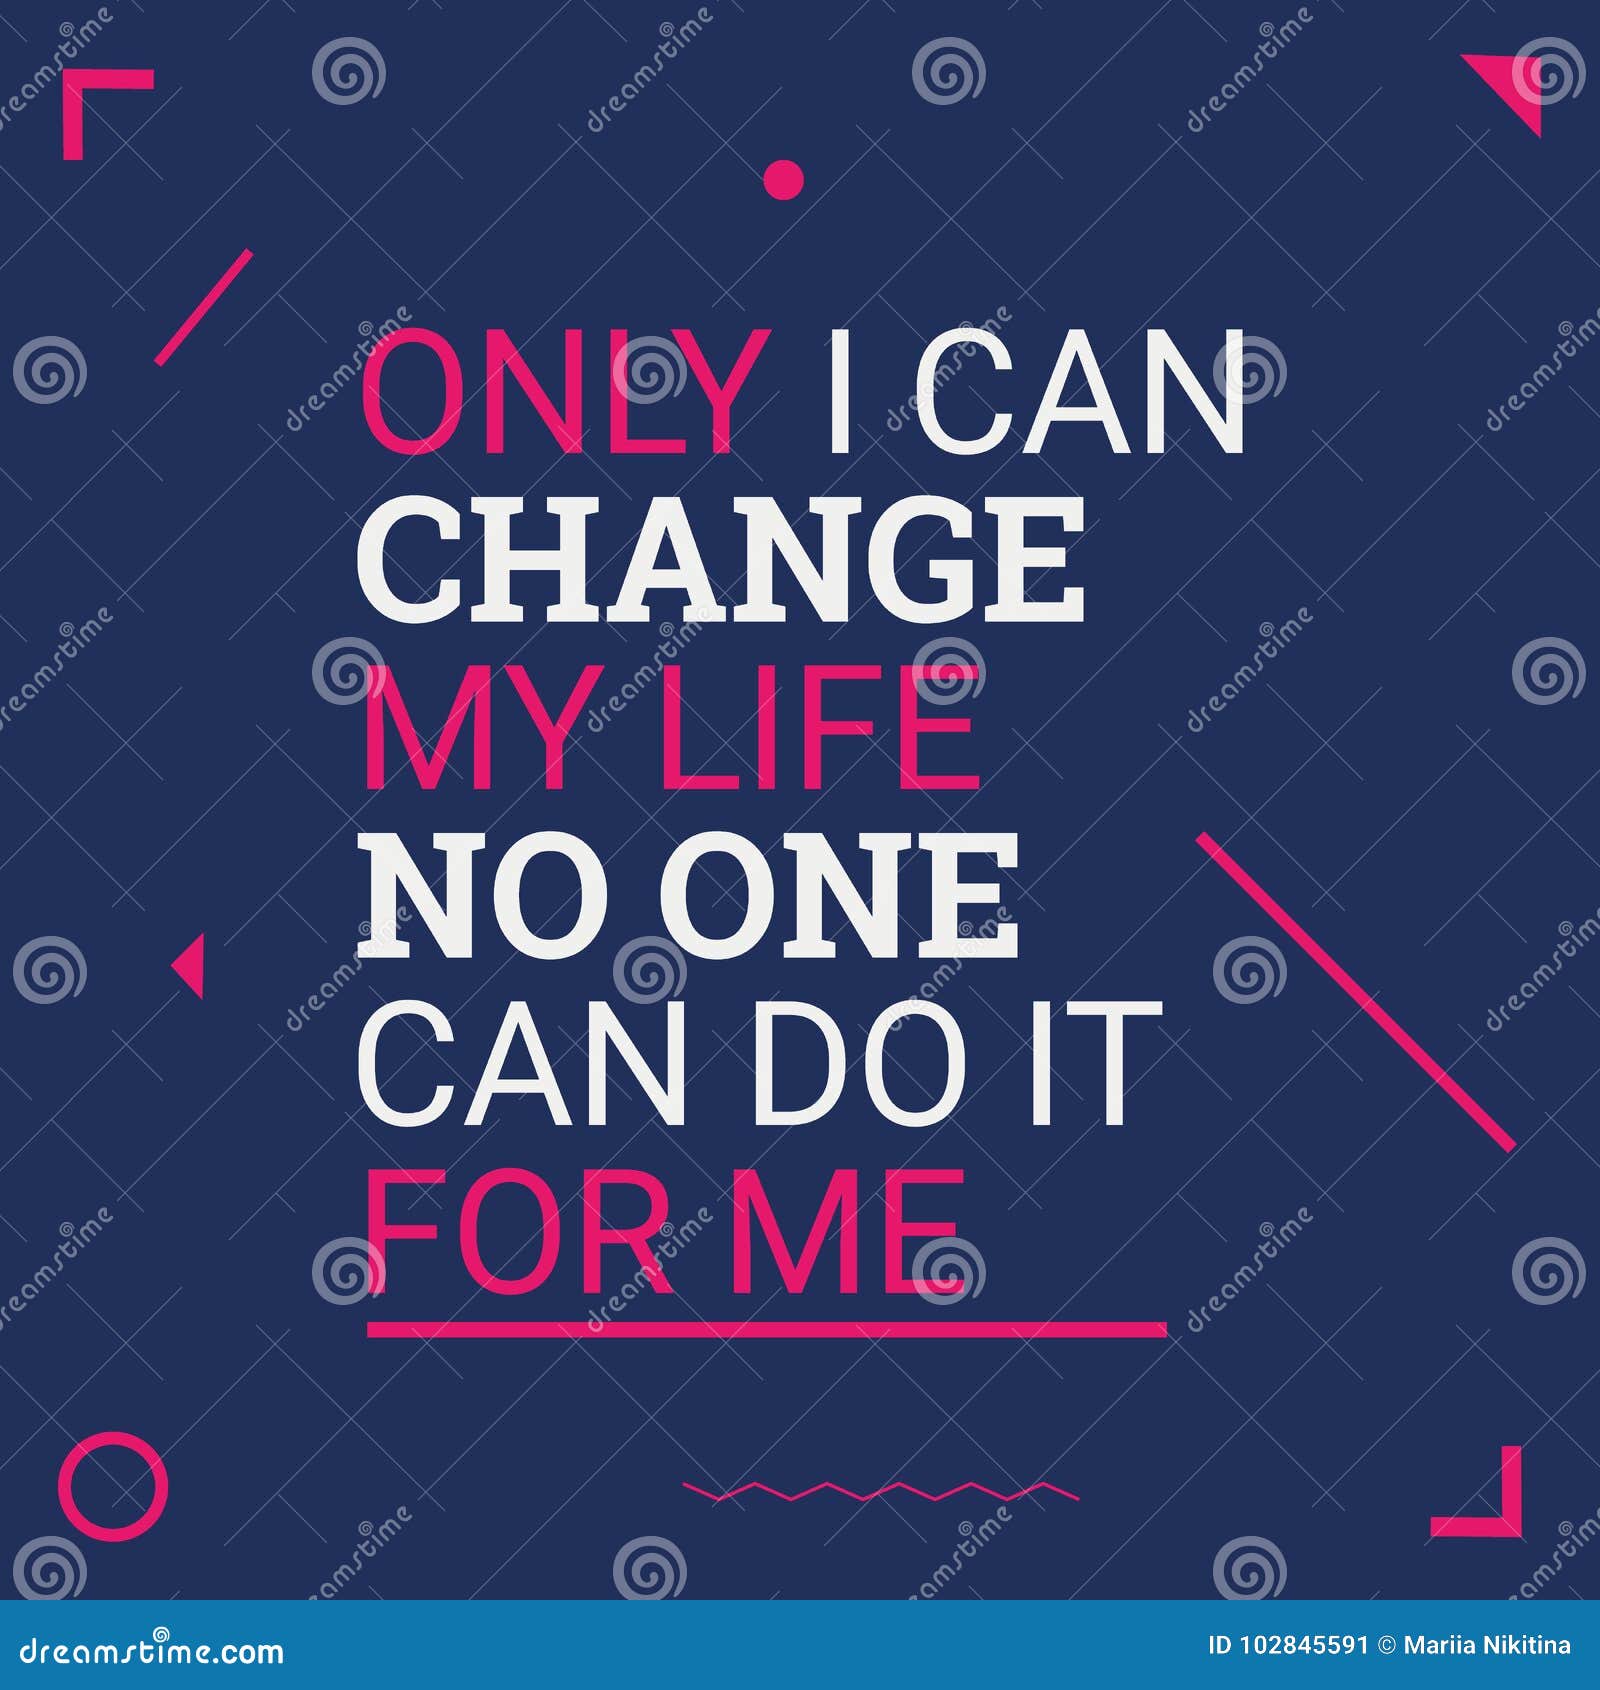 Only i can change my life stock vector. Illustration of sign